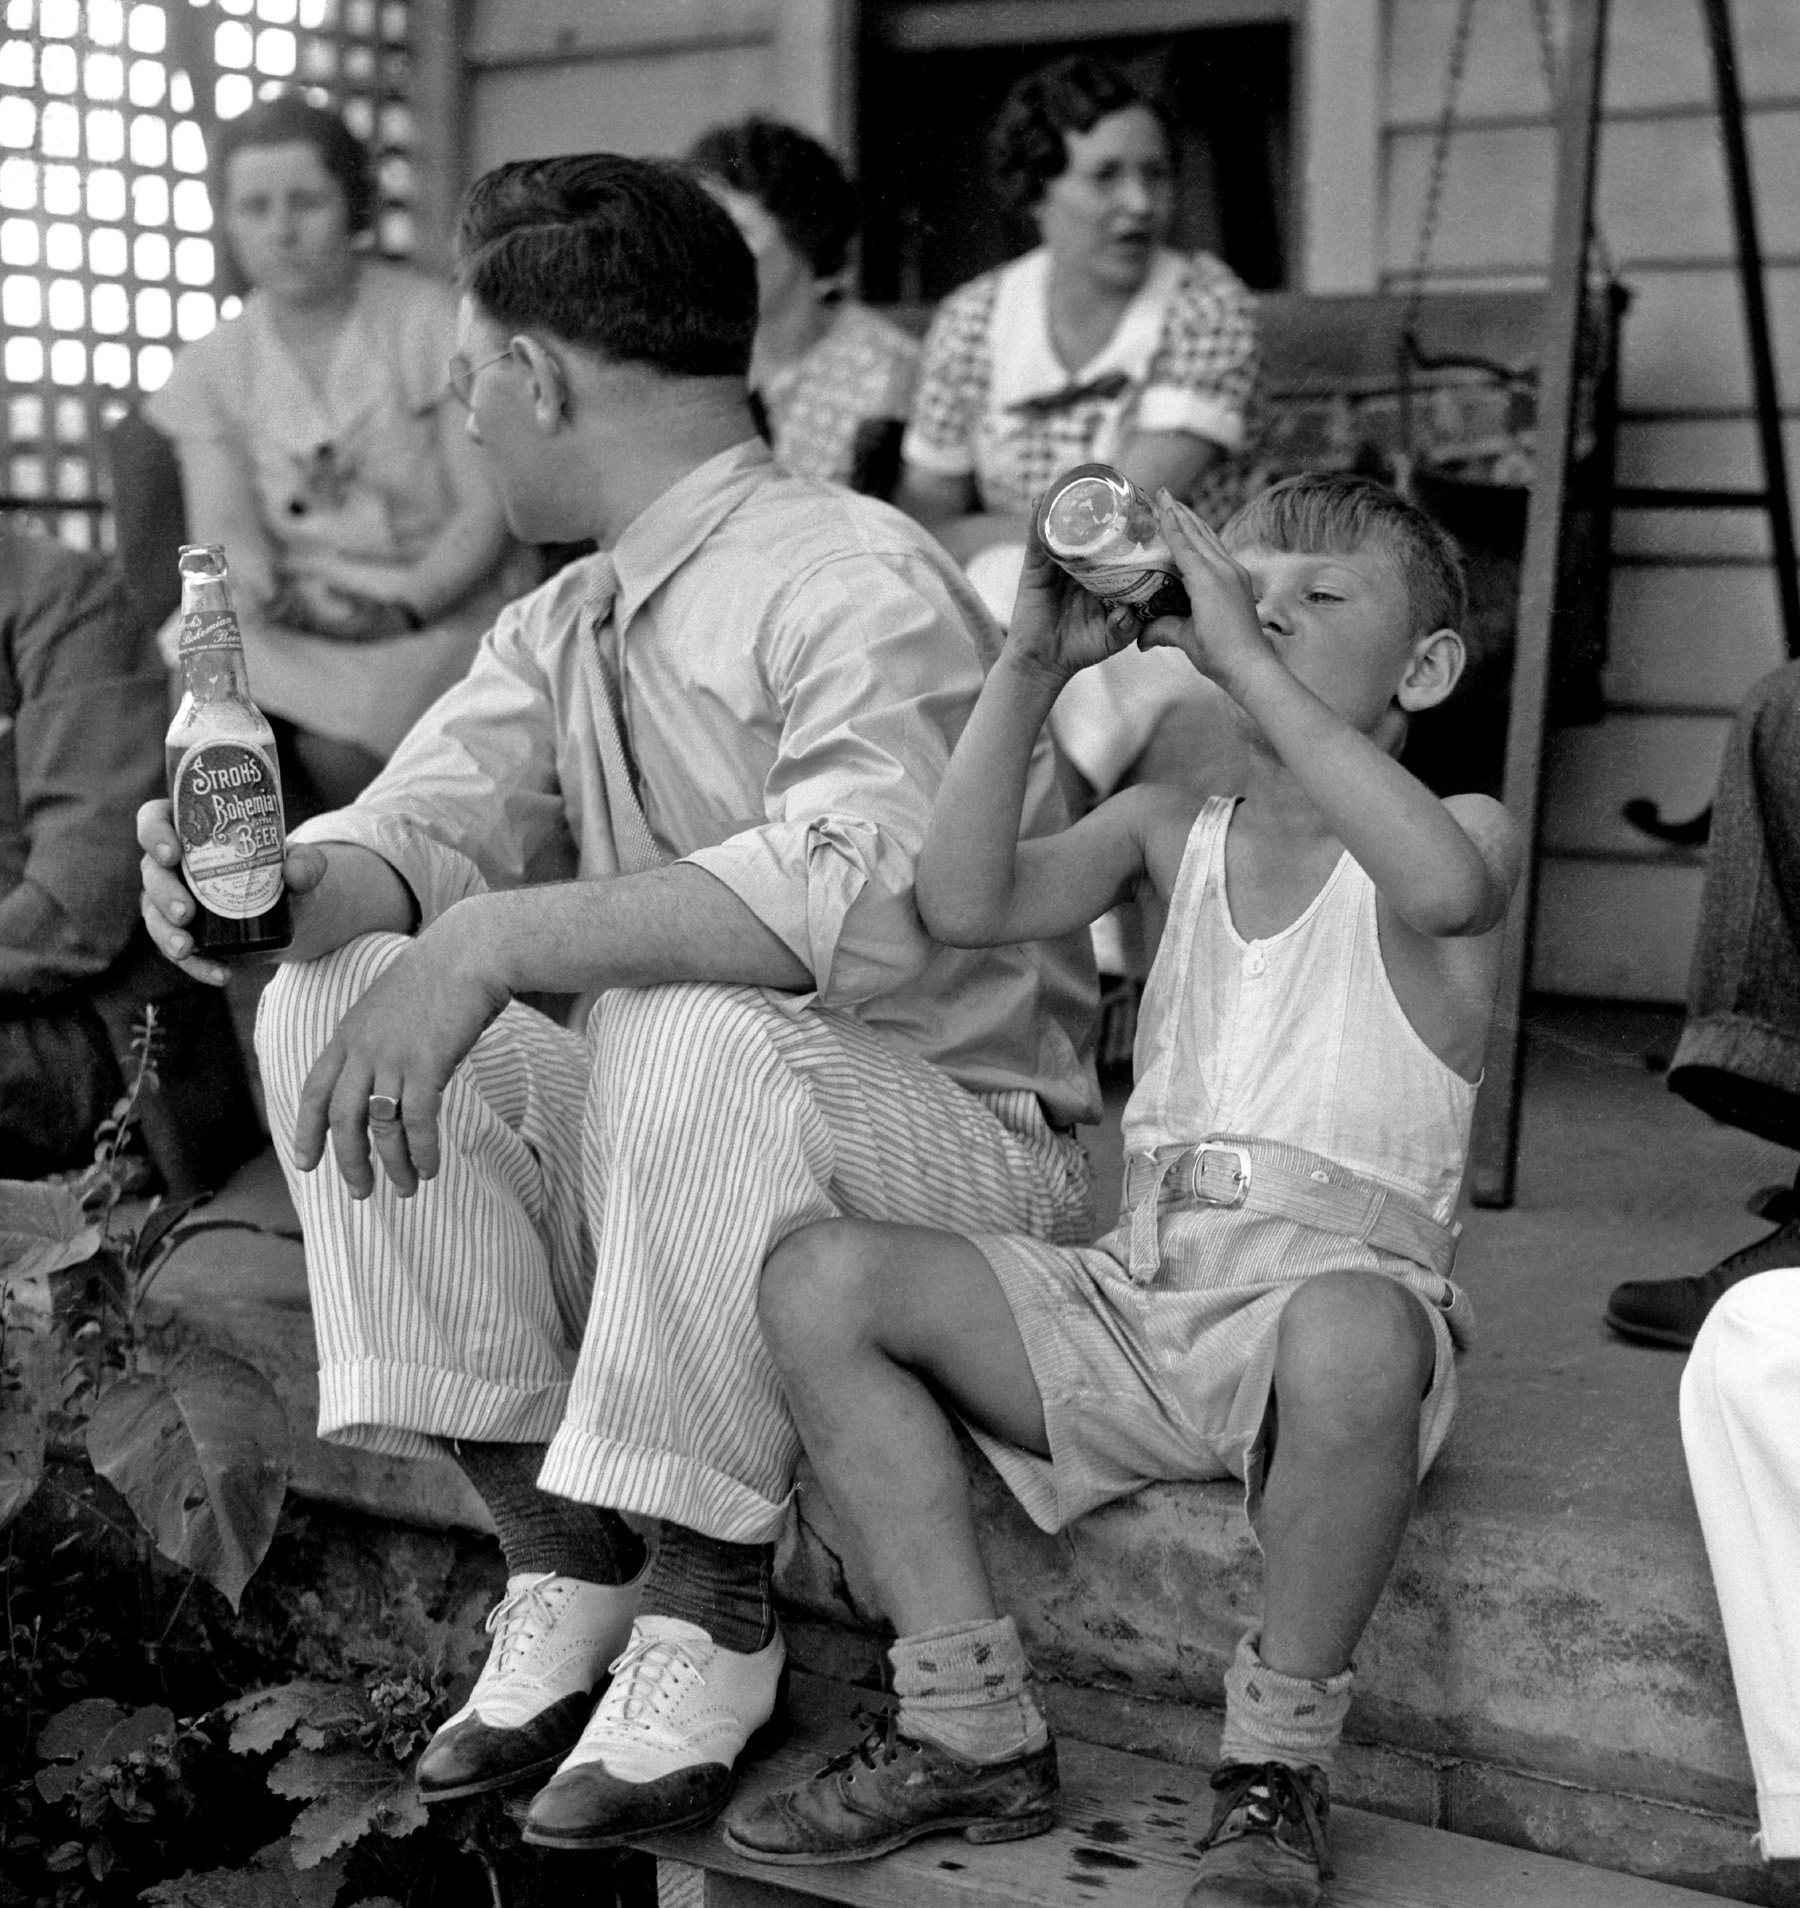 Circa 1935 family portrait by my grandfather Howard McGraw, a photographer for the Detroit News for almost 40 years, of his brother and a thirsty young nephew. Scanned from a 4x5 negative. View full size.